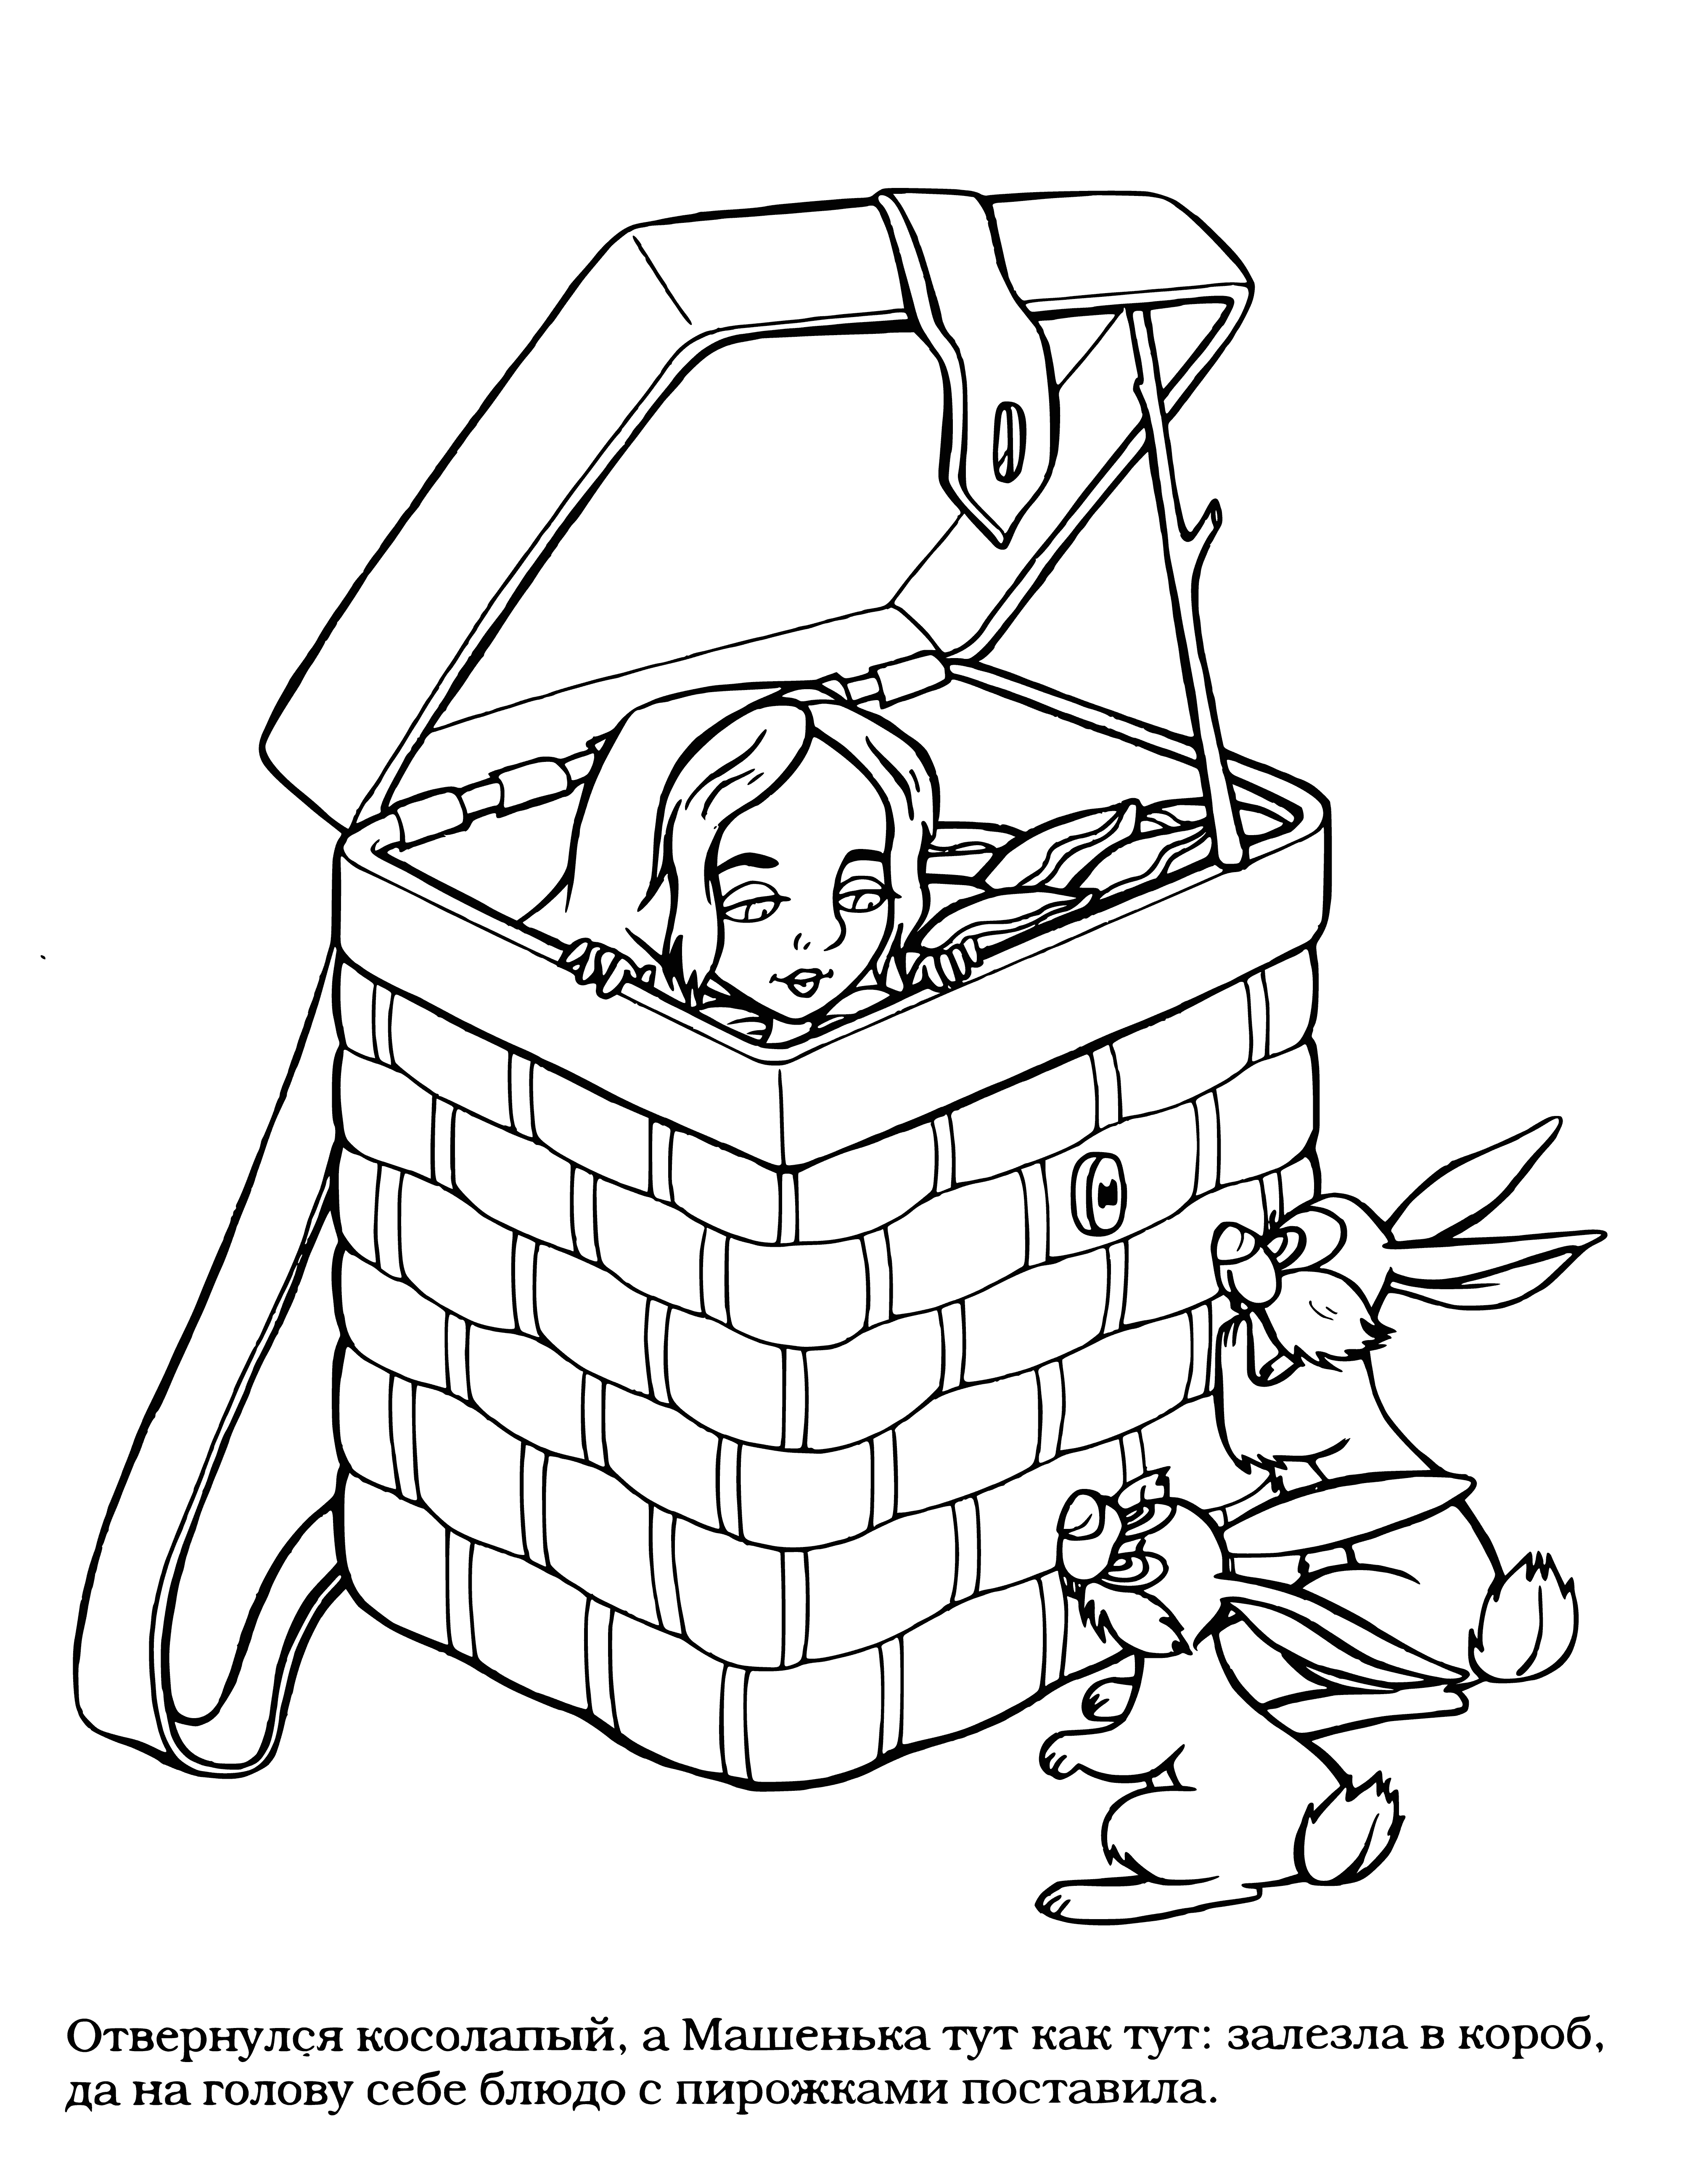 coloring page: Masha is in hiding, playing a game of hide-and-seek with pursuers. She's laughing, knowing she won't be found.